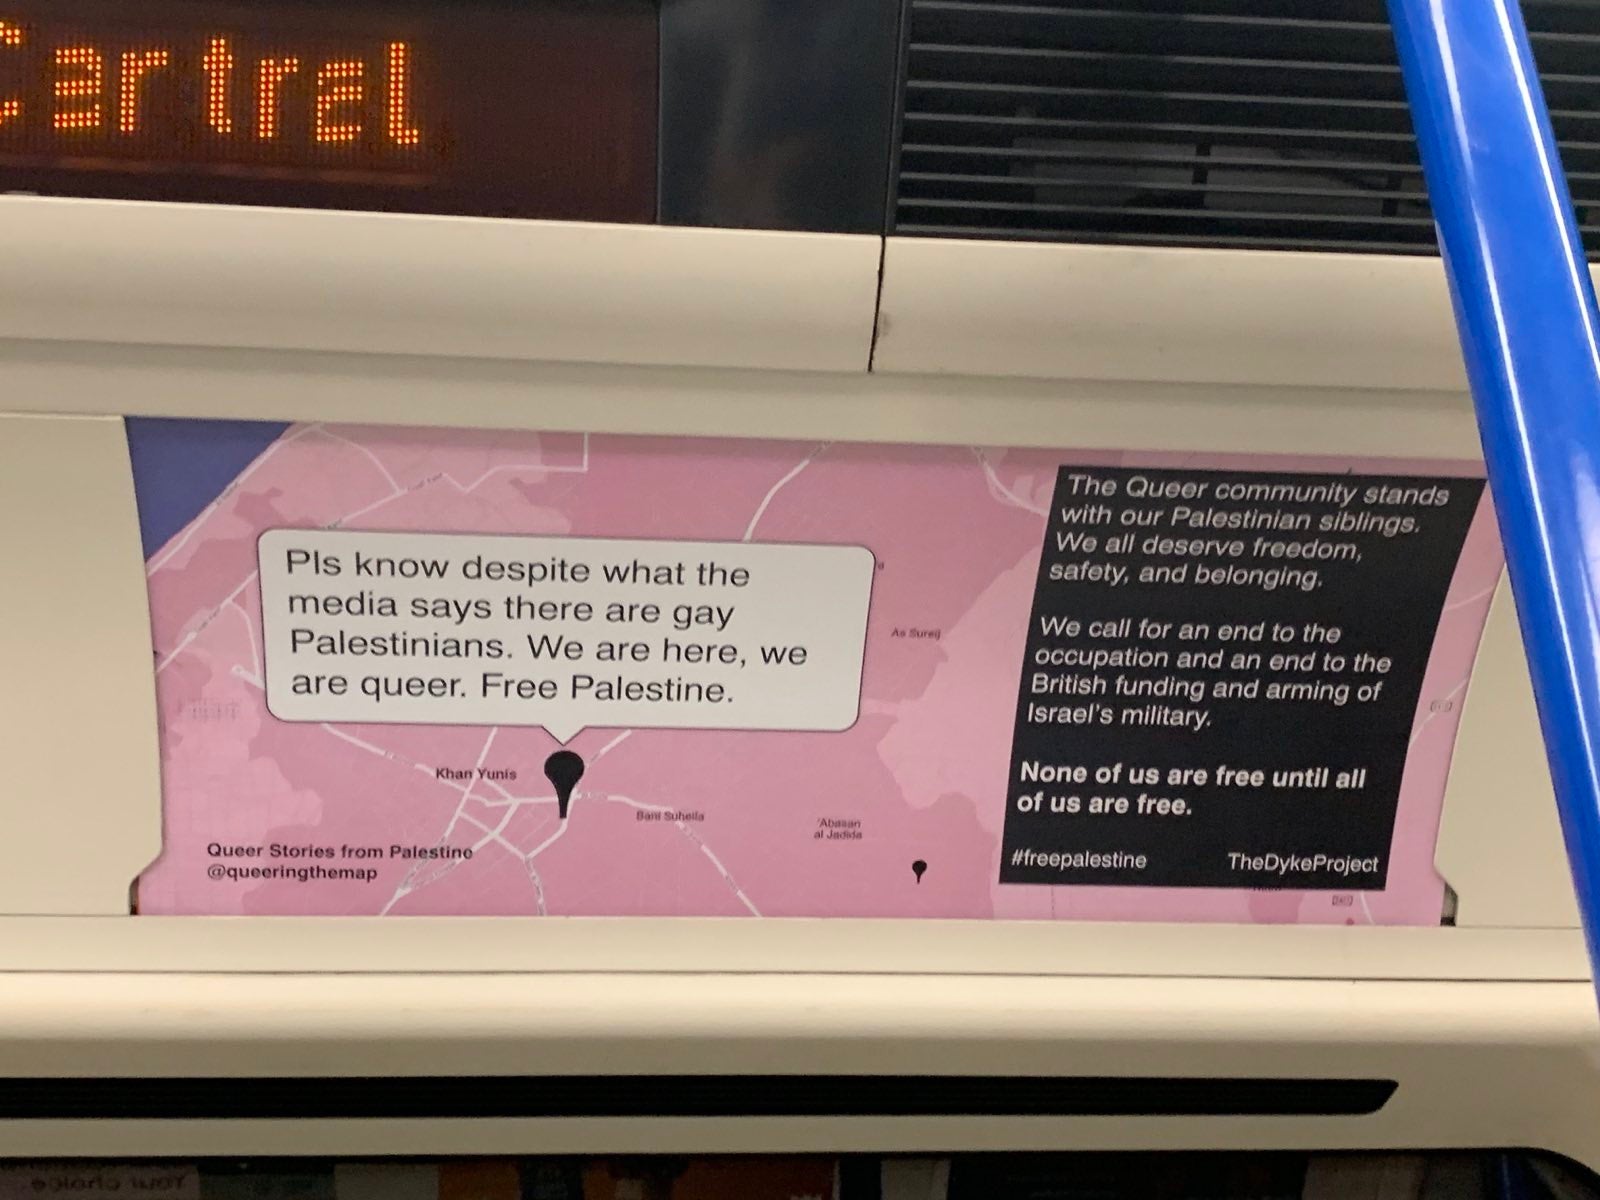 The Dyke Group hacked over a hundred posters across tubes and bus stops in London